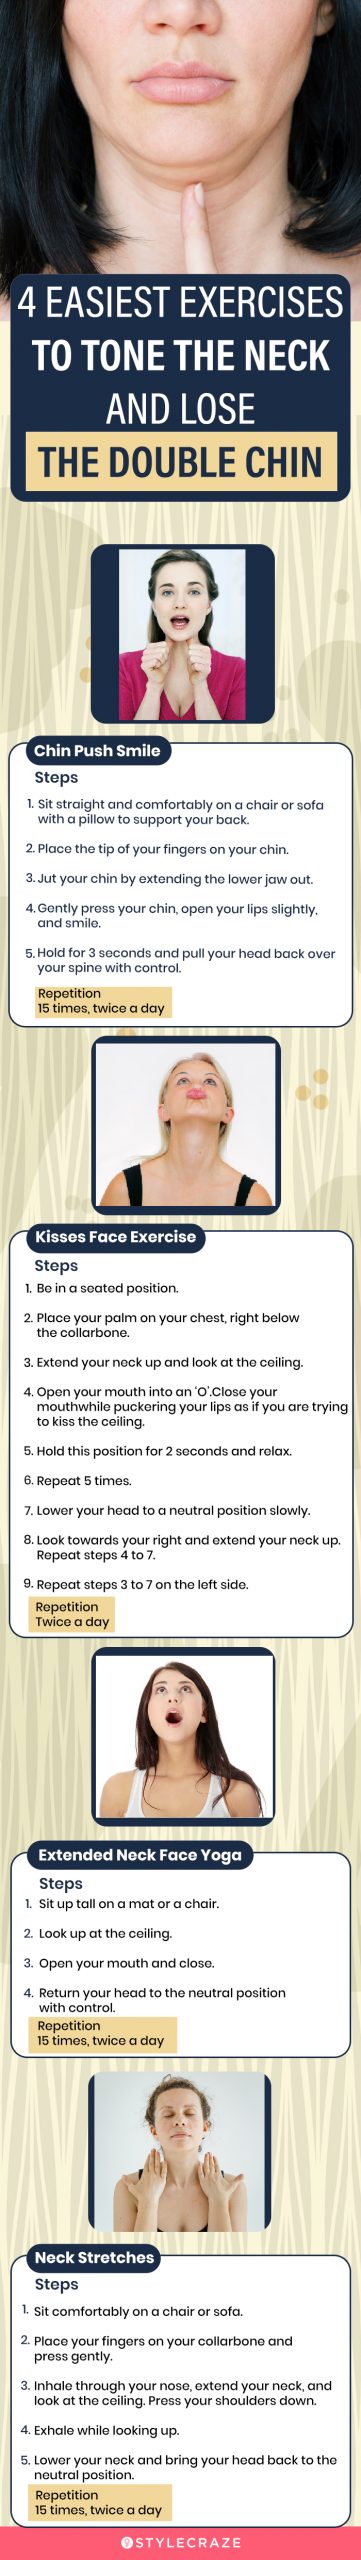 4 easiest exercises to tone the neck and lose the double chin (infographic)